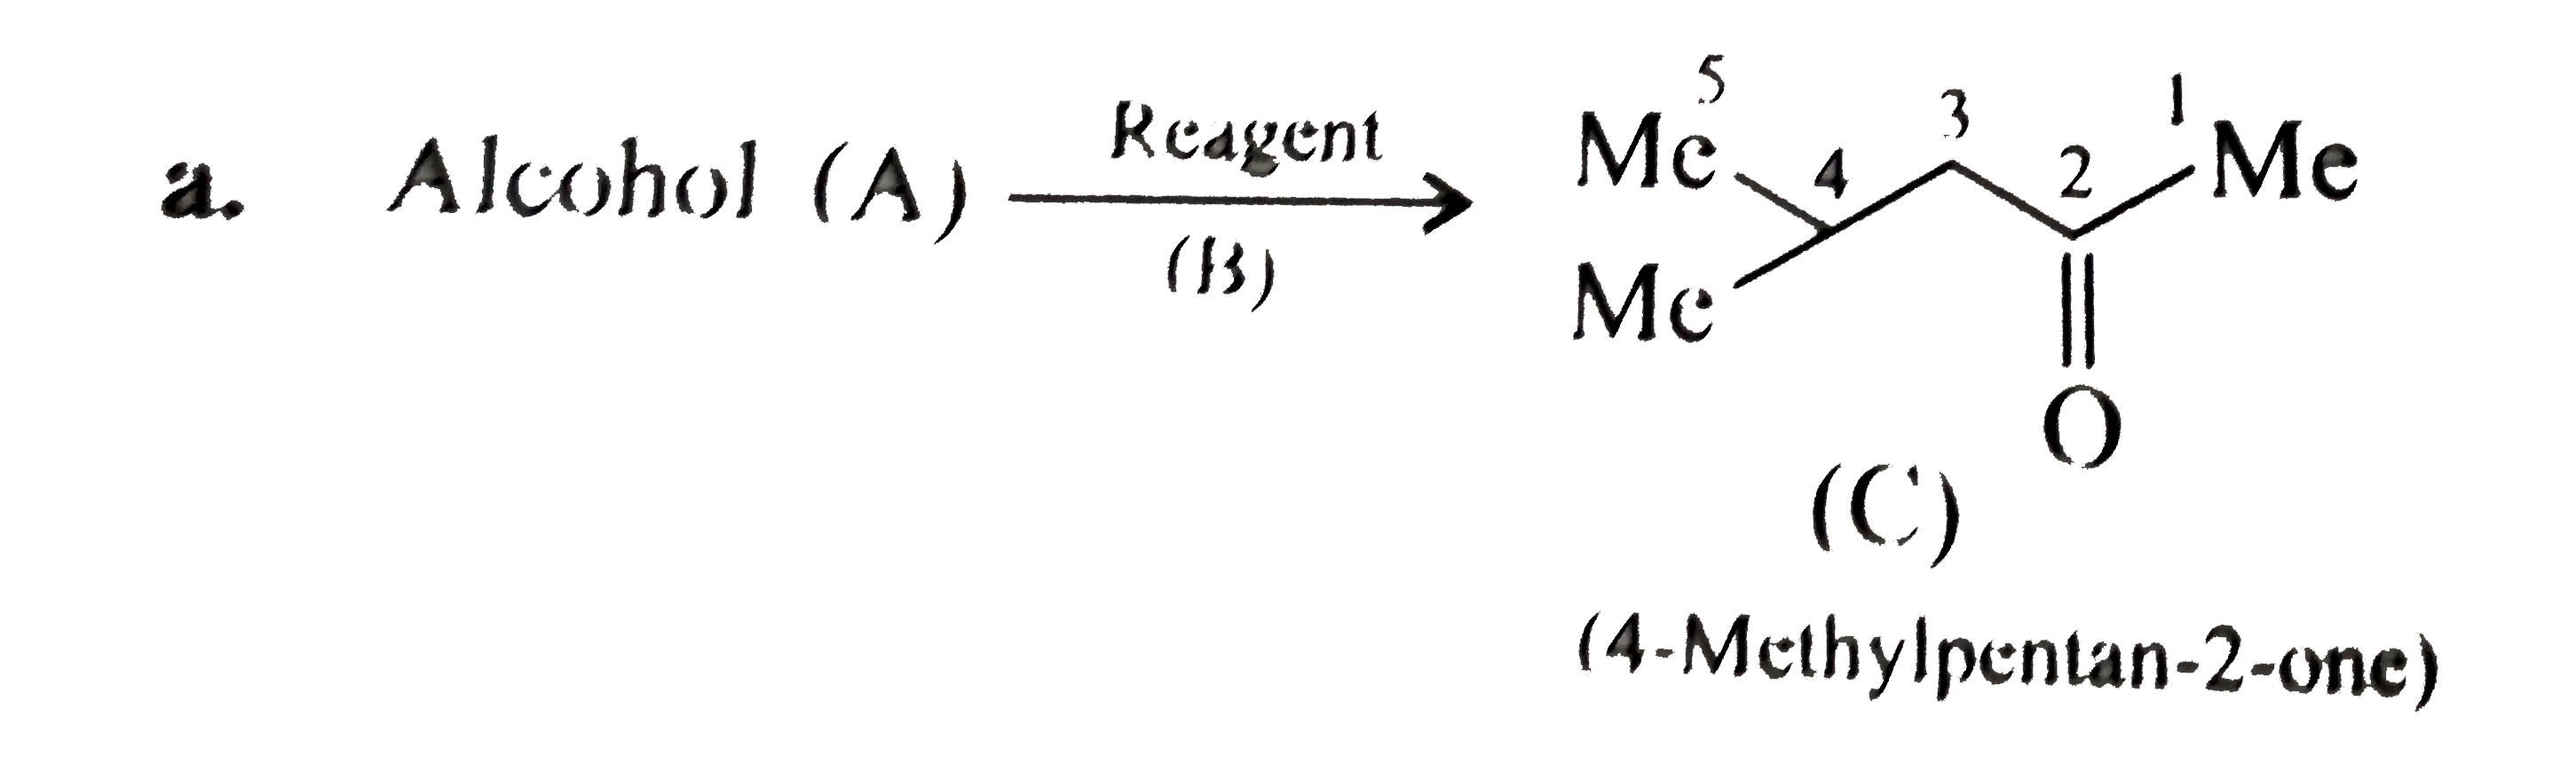 Complete the following reactions:   a. Alcohol (A) overset(Reag ent)underset(B)(rarr)    b. Alkyne (D) overset(Reag ent)underset(E)(rarr) Product(C)   c. Acid chloride (F) overset(Reag ent)underset(G)(rarr)Product(C)   d. Acid(H) overset(Reag ent)underset(I)(rarr)Product (C)   e. Nitro compound (J)  overset(Reag ent)underset(K)(rarr) Product(C)   f. Alkyl nitrile (L) overset(Reag ent)underset(M)(rarr) Product(C)